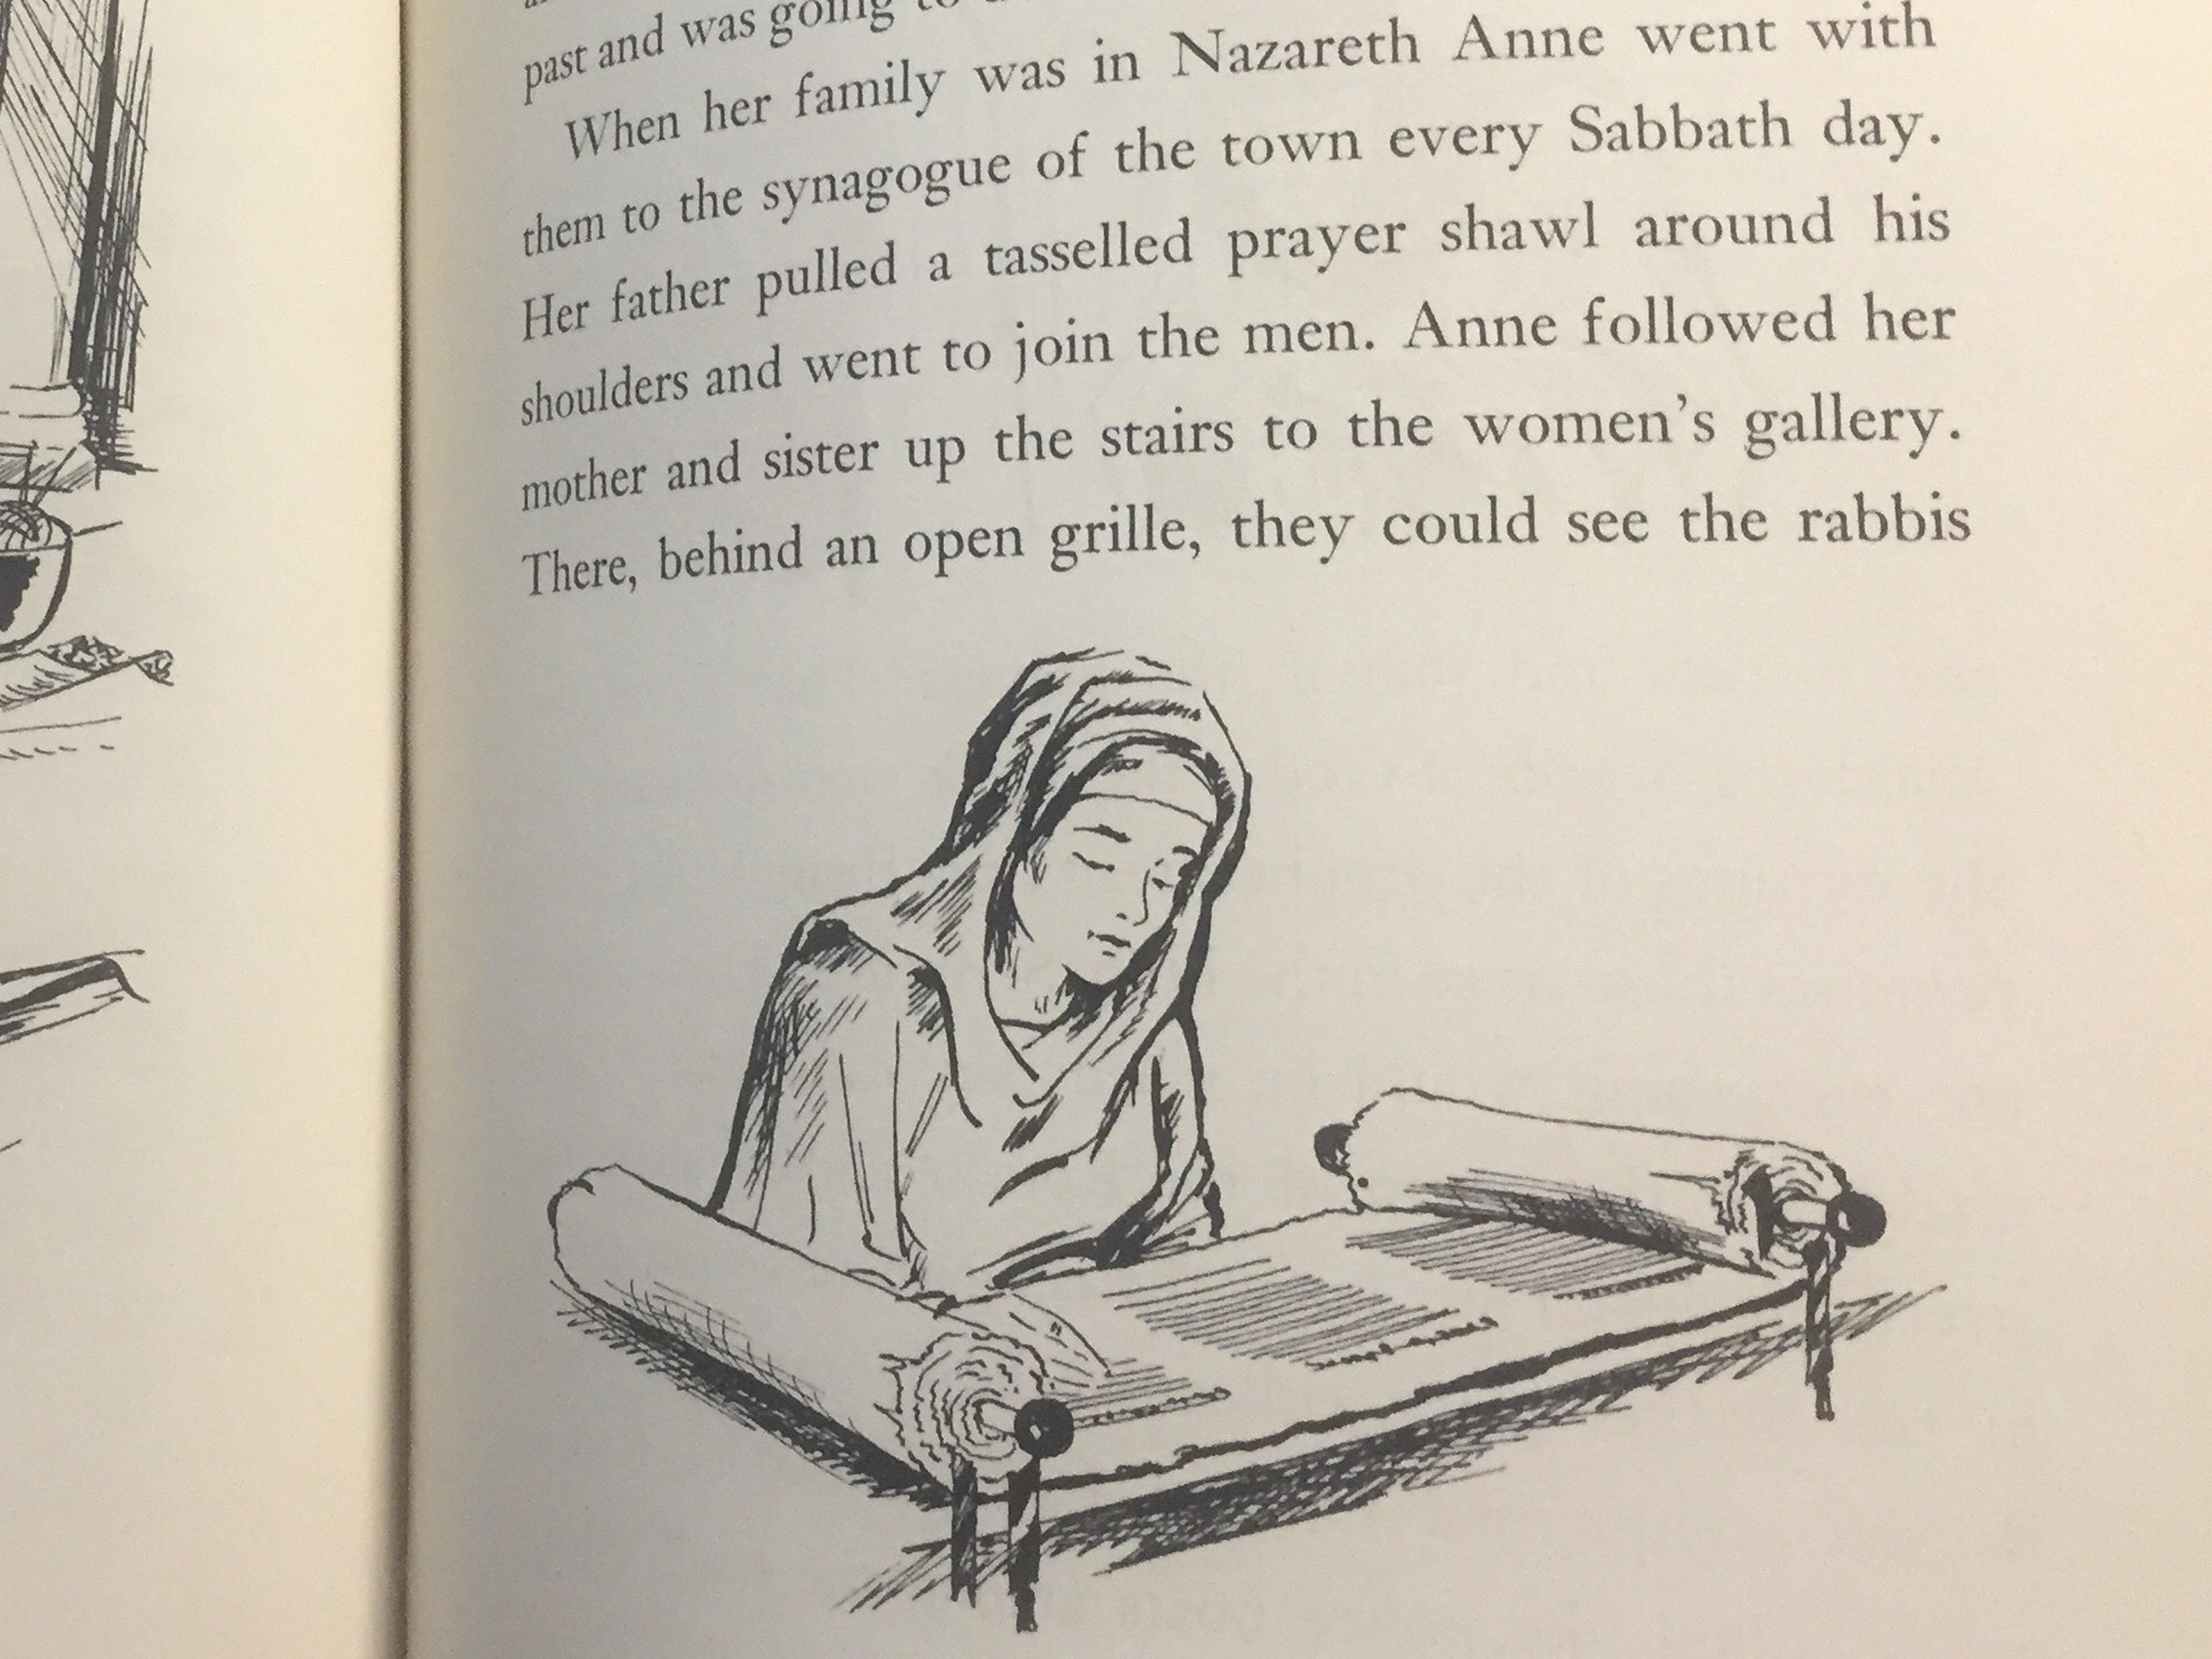 Line drawing of St. Anne as a young woman reading an open scroll